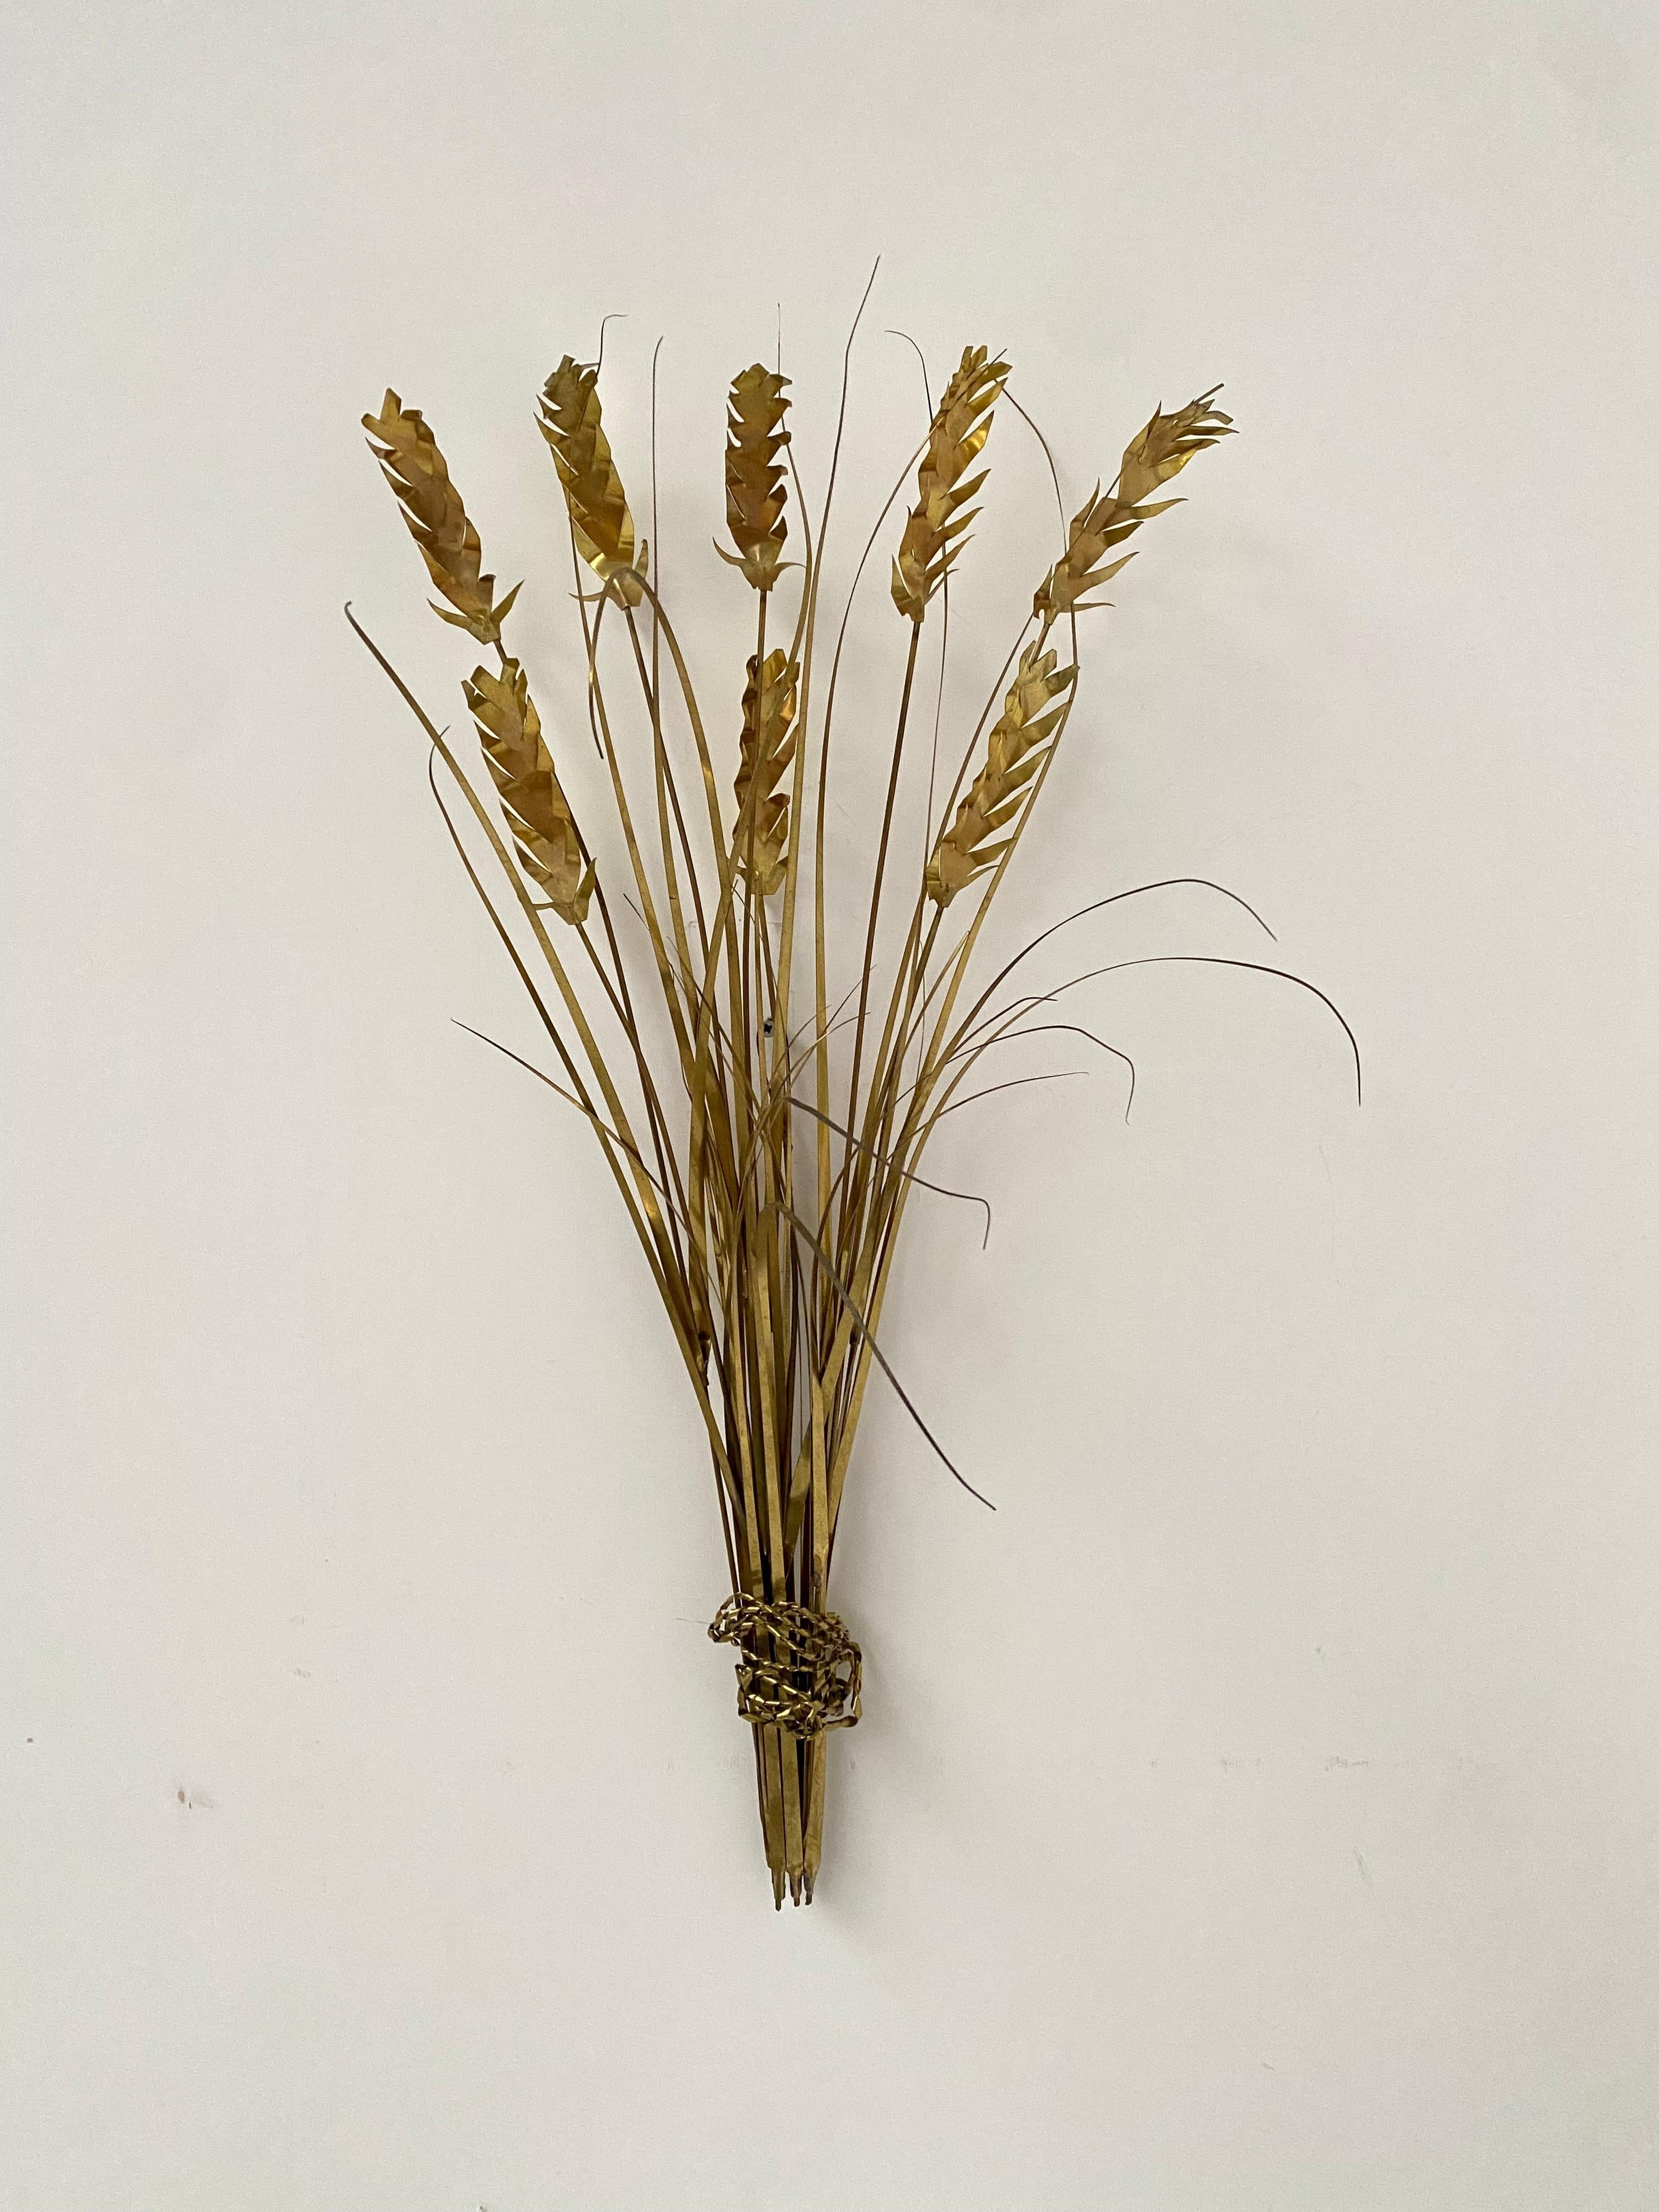 Brass artisan made corn-bundle by Belgian Sculpter & Designer Daniel d'Haeseleer 1970's
Signed with artists's signature 

original label info & photo has been found online, this pieces does not have this label

Daniel d'Haeseleer Belgiam